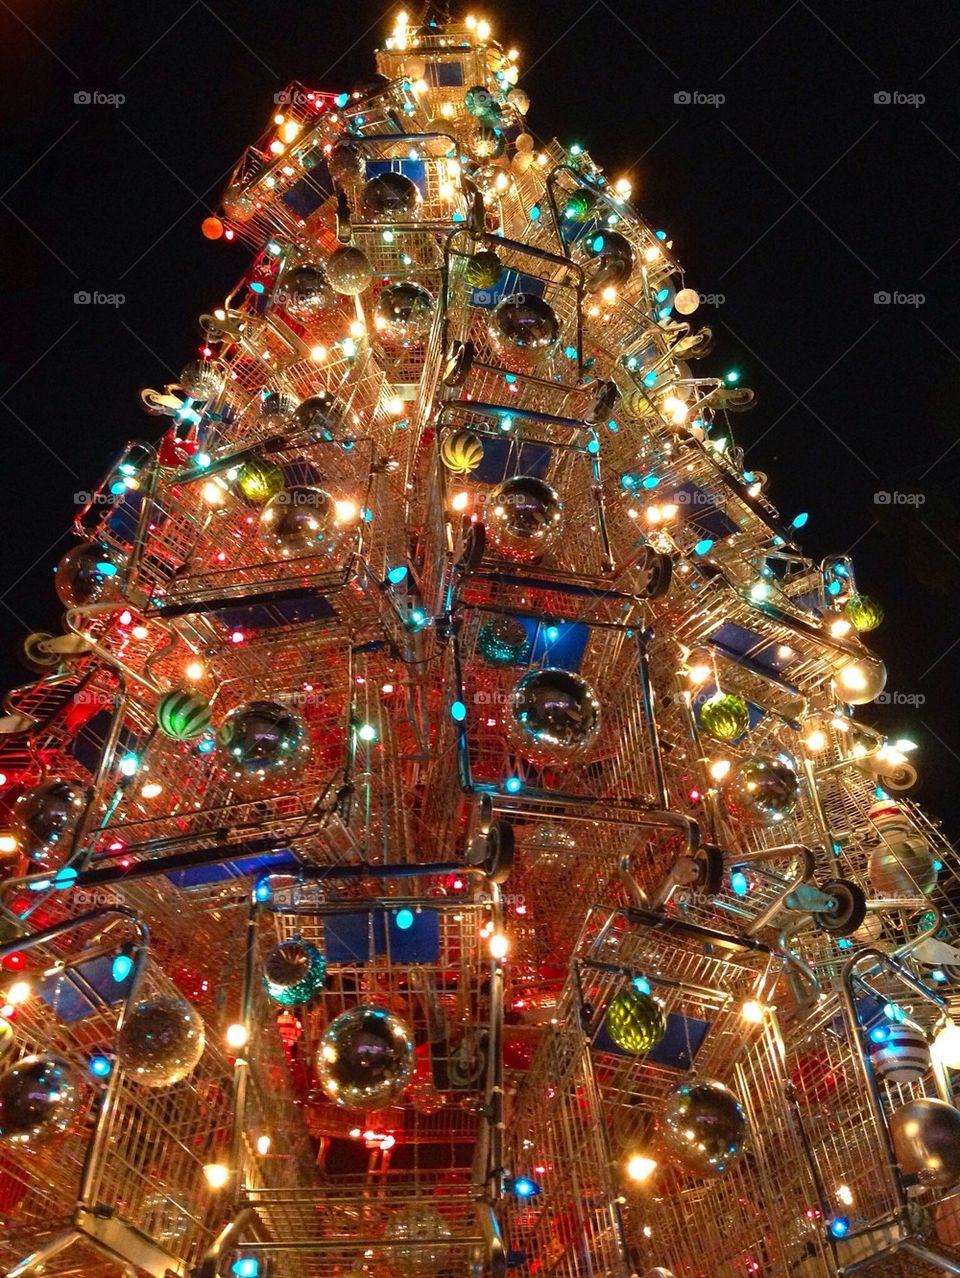 A Christmas tree made out of shopping carts! 